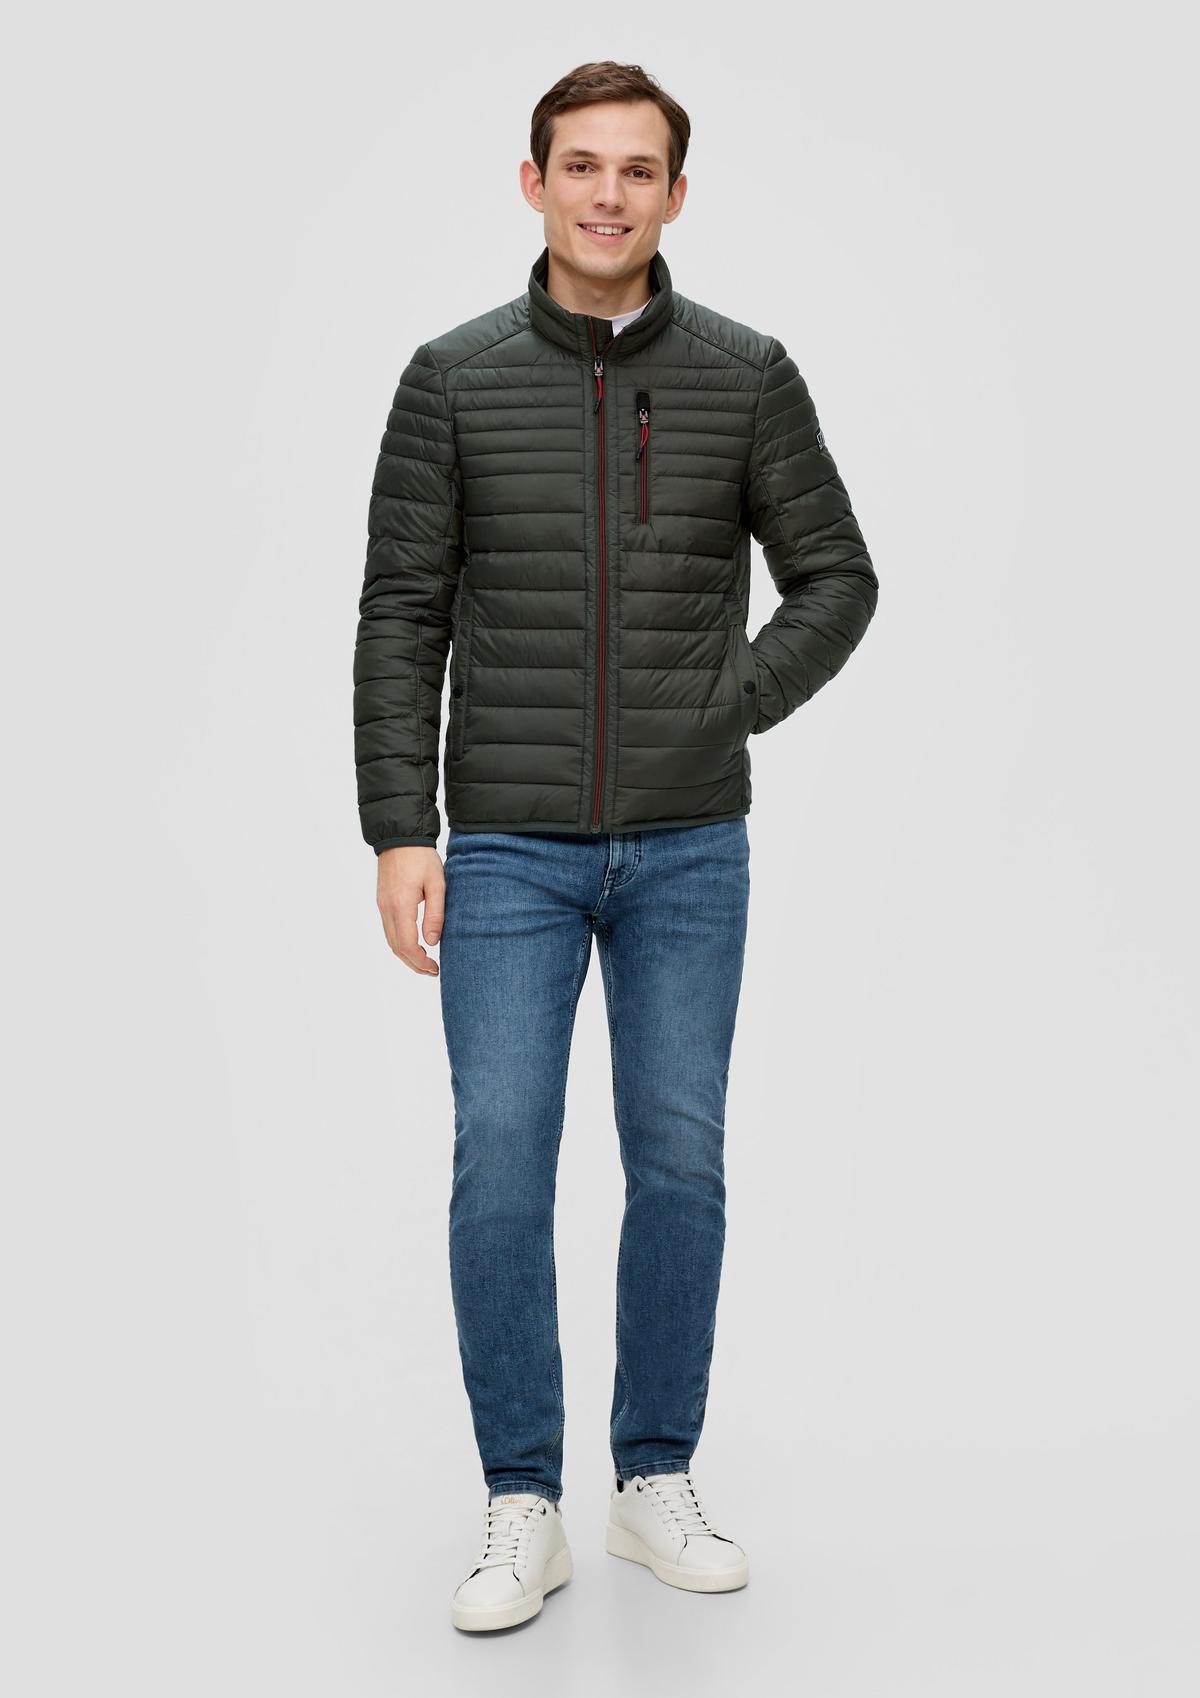 s.Oliver Quilted outdoor jacket with a stand-up collar